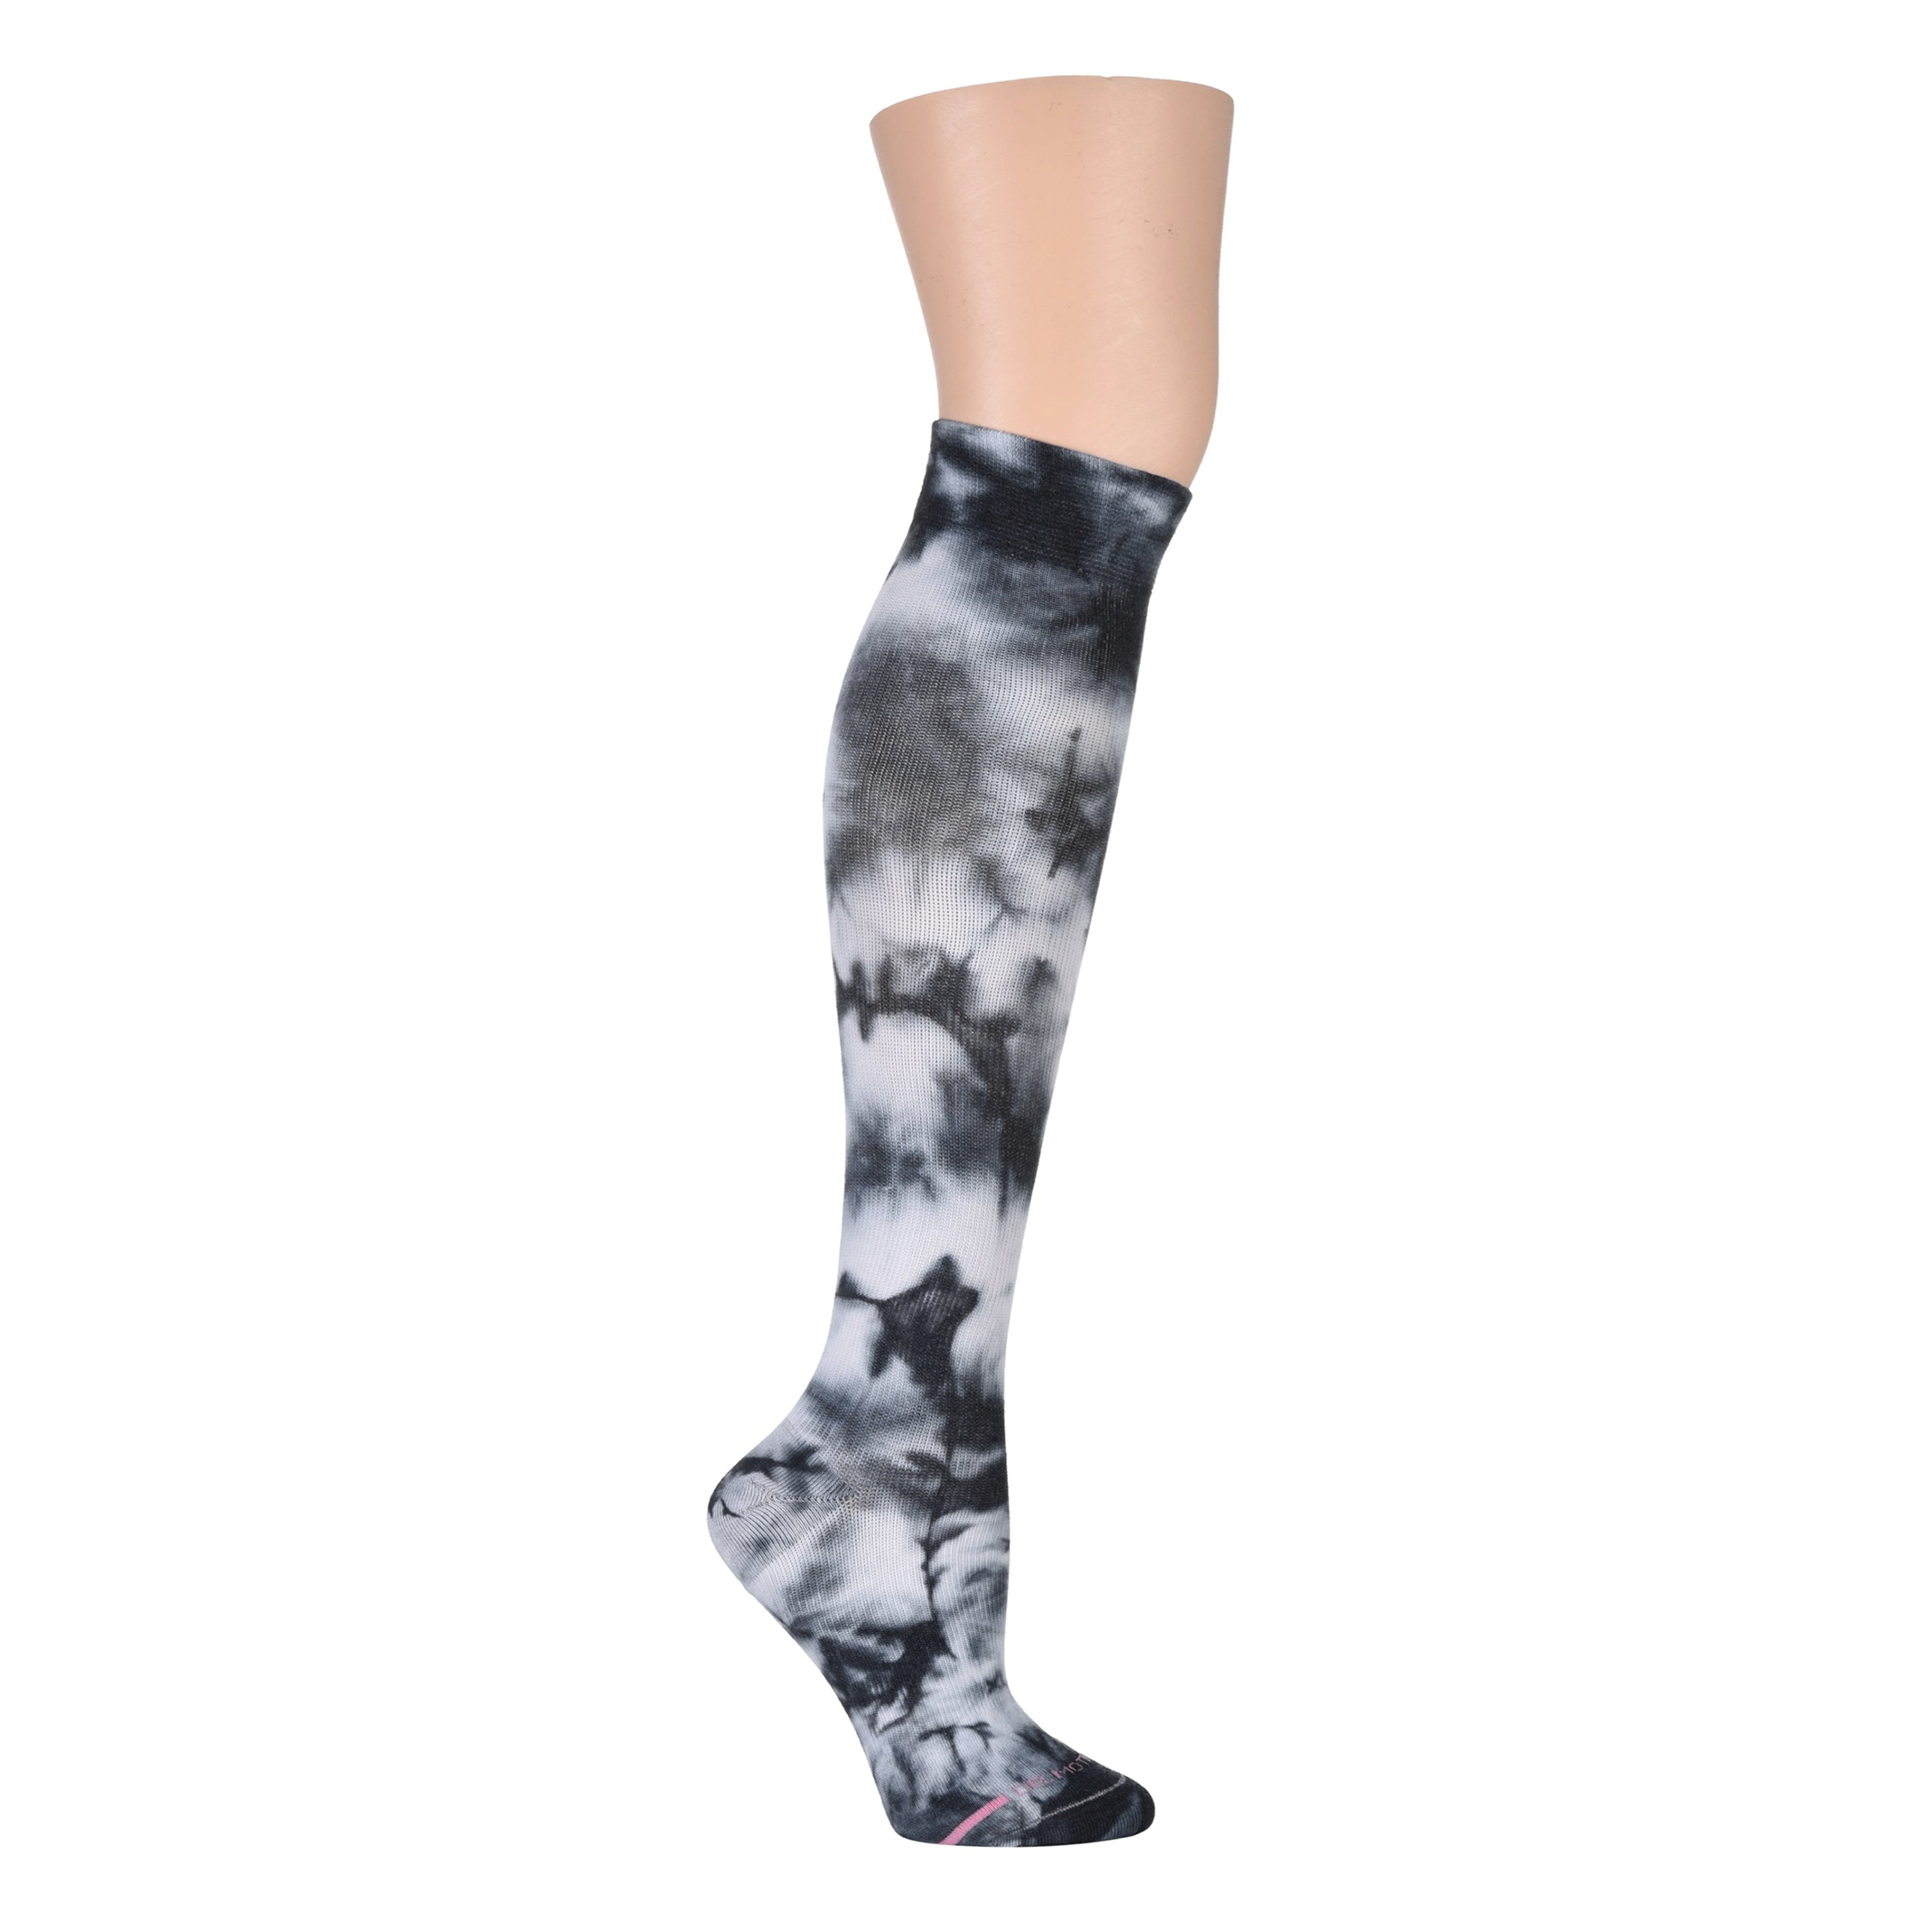 Compression Calf Sleeves For Men & Women, Dr. Motion